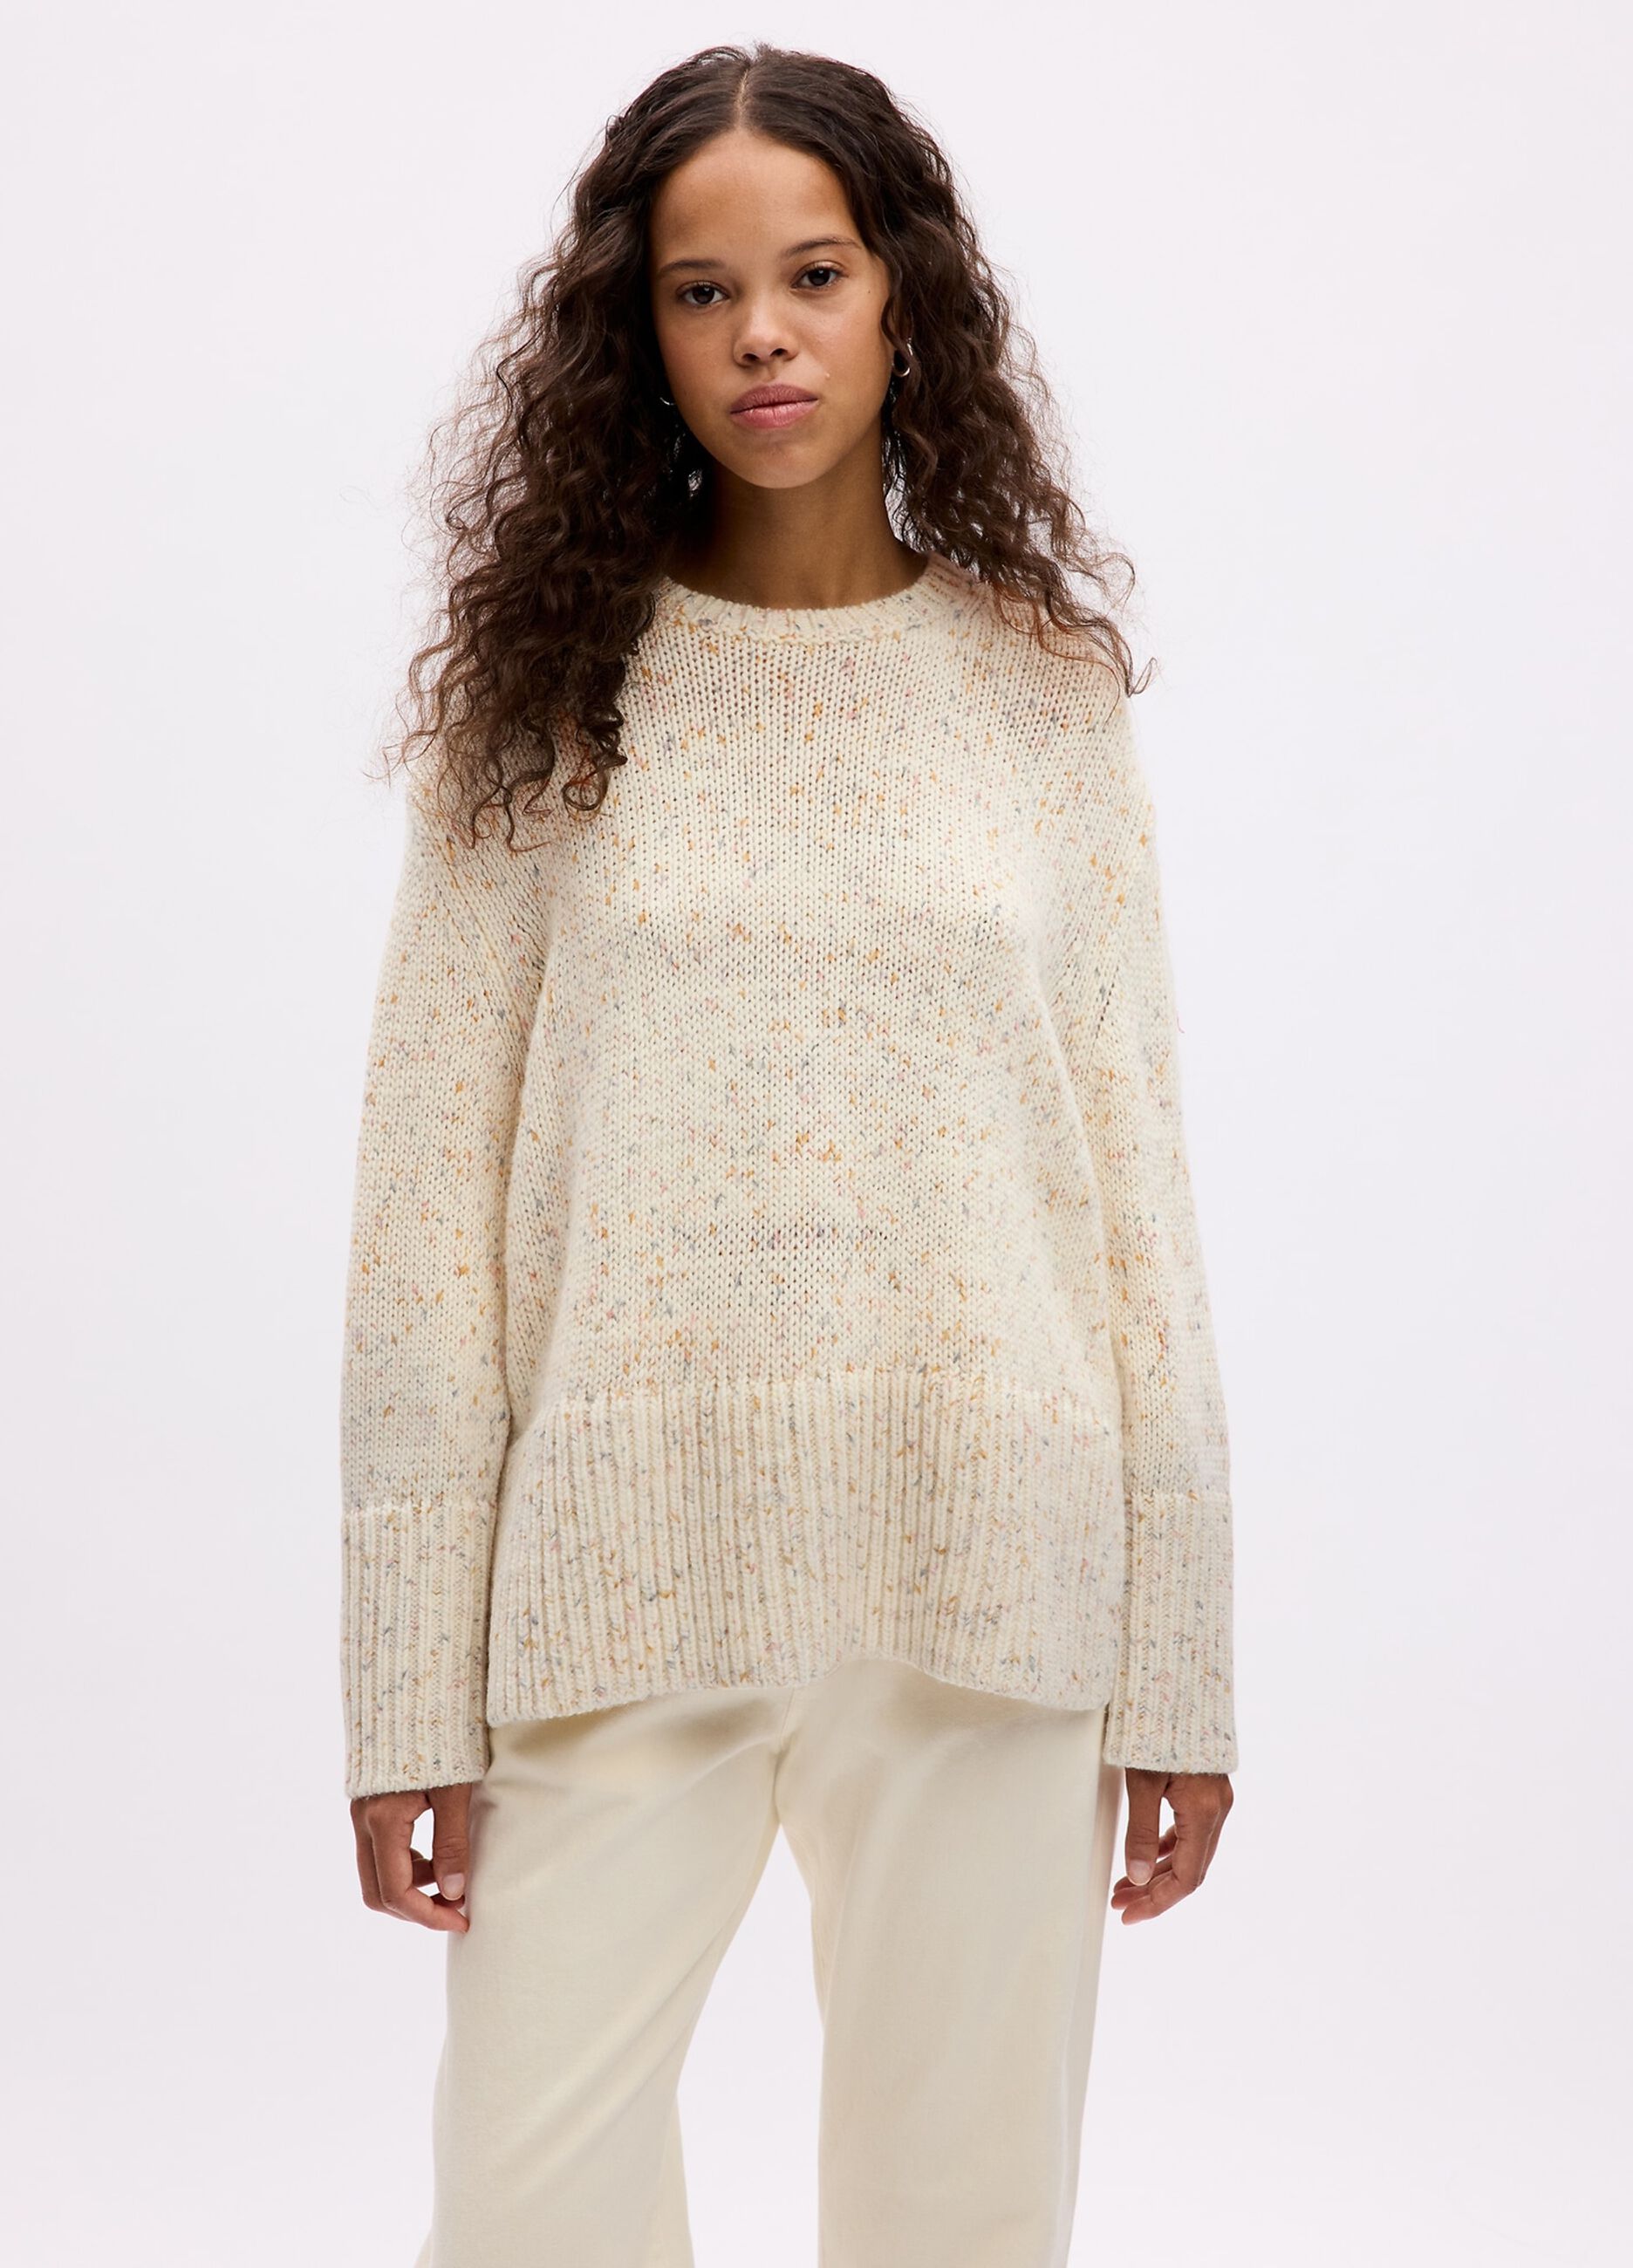 Mouliné-effect oversized pullover with splits